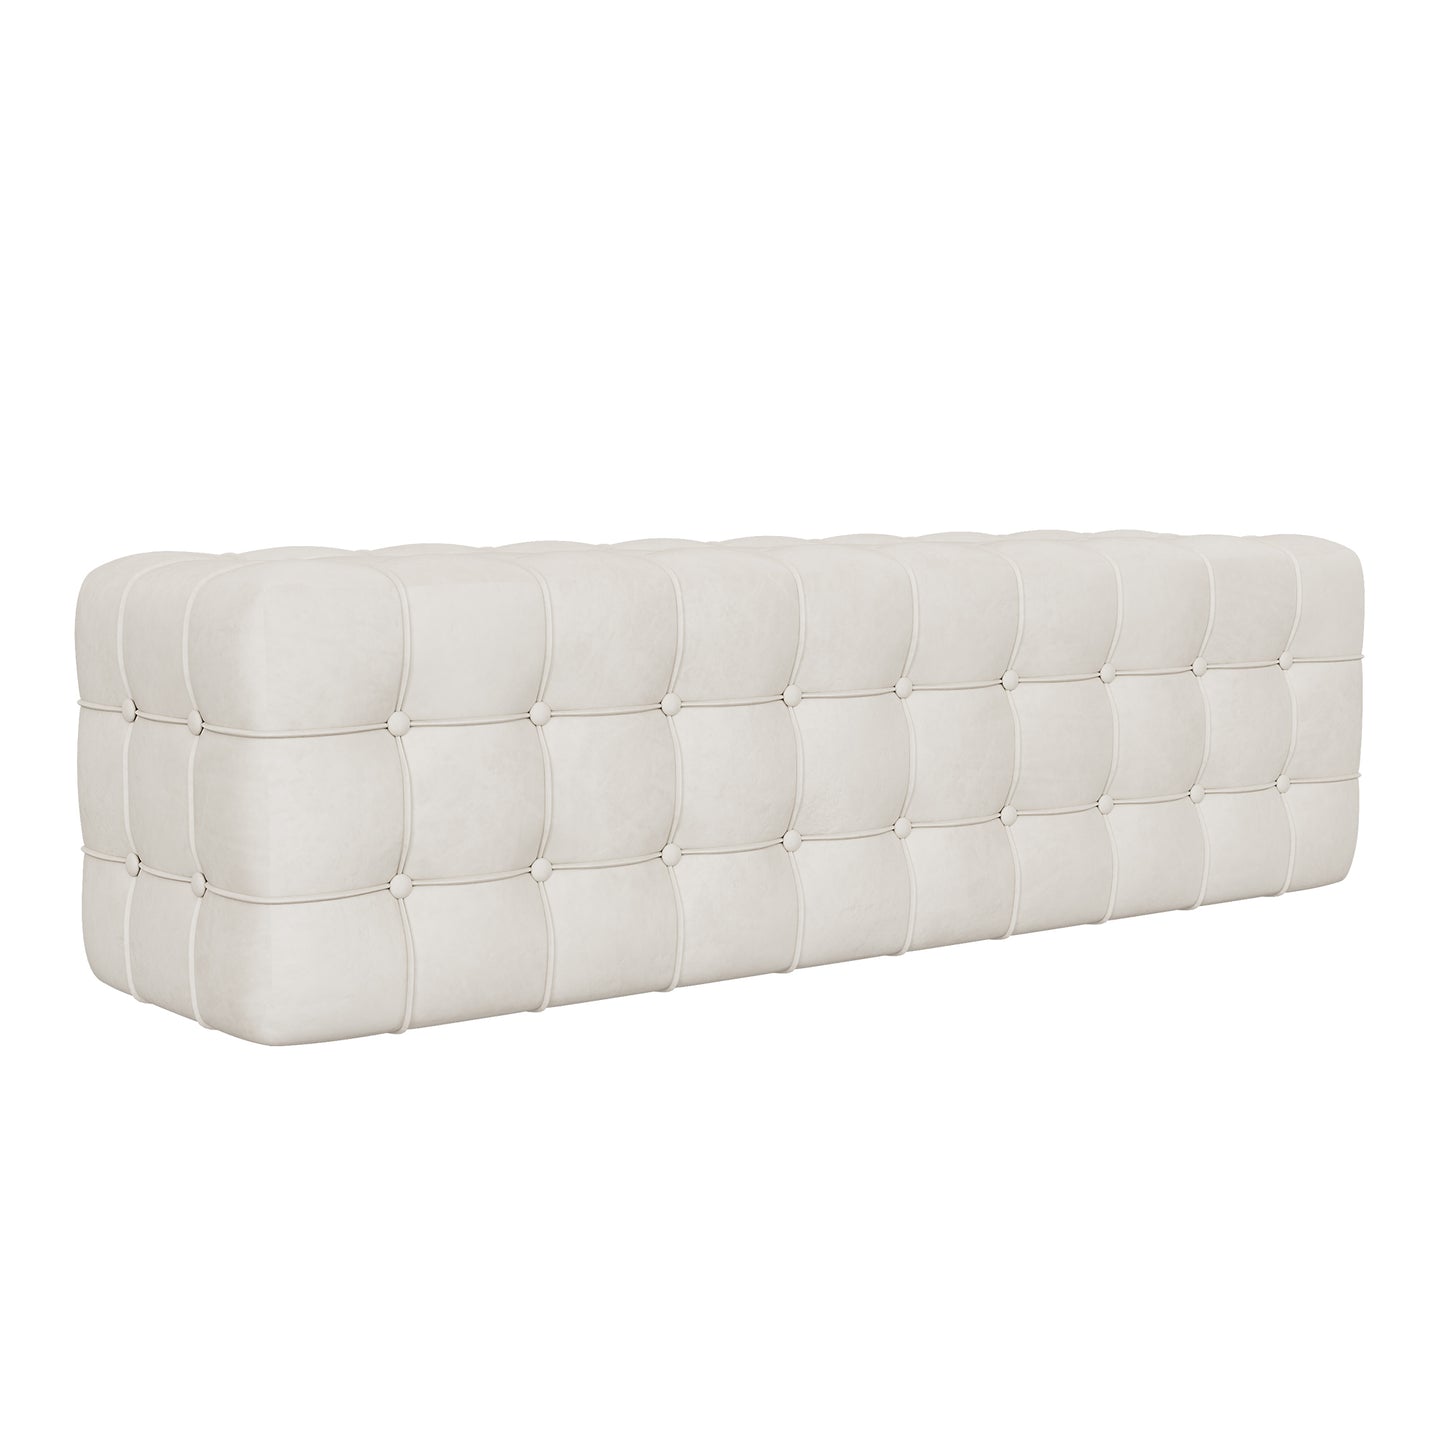 All Covered Velvet Upholstered Ottoman, Rectangular Footstool, Bedroom Footstool, No Assembly Required, Elegant and Luxurious, White